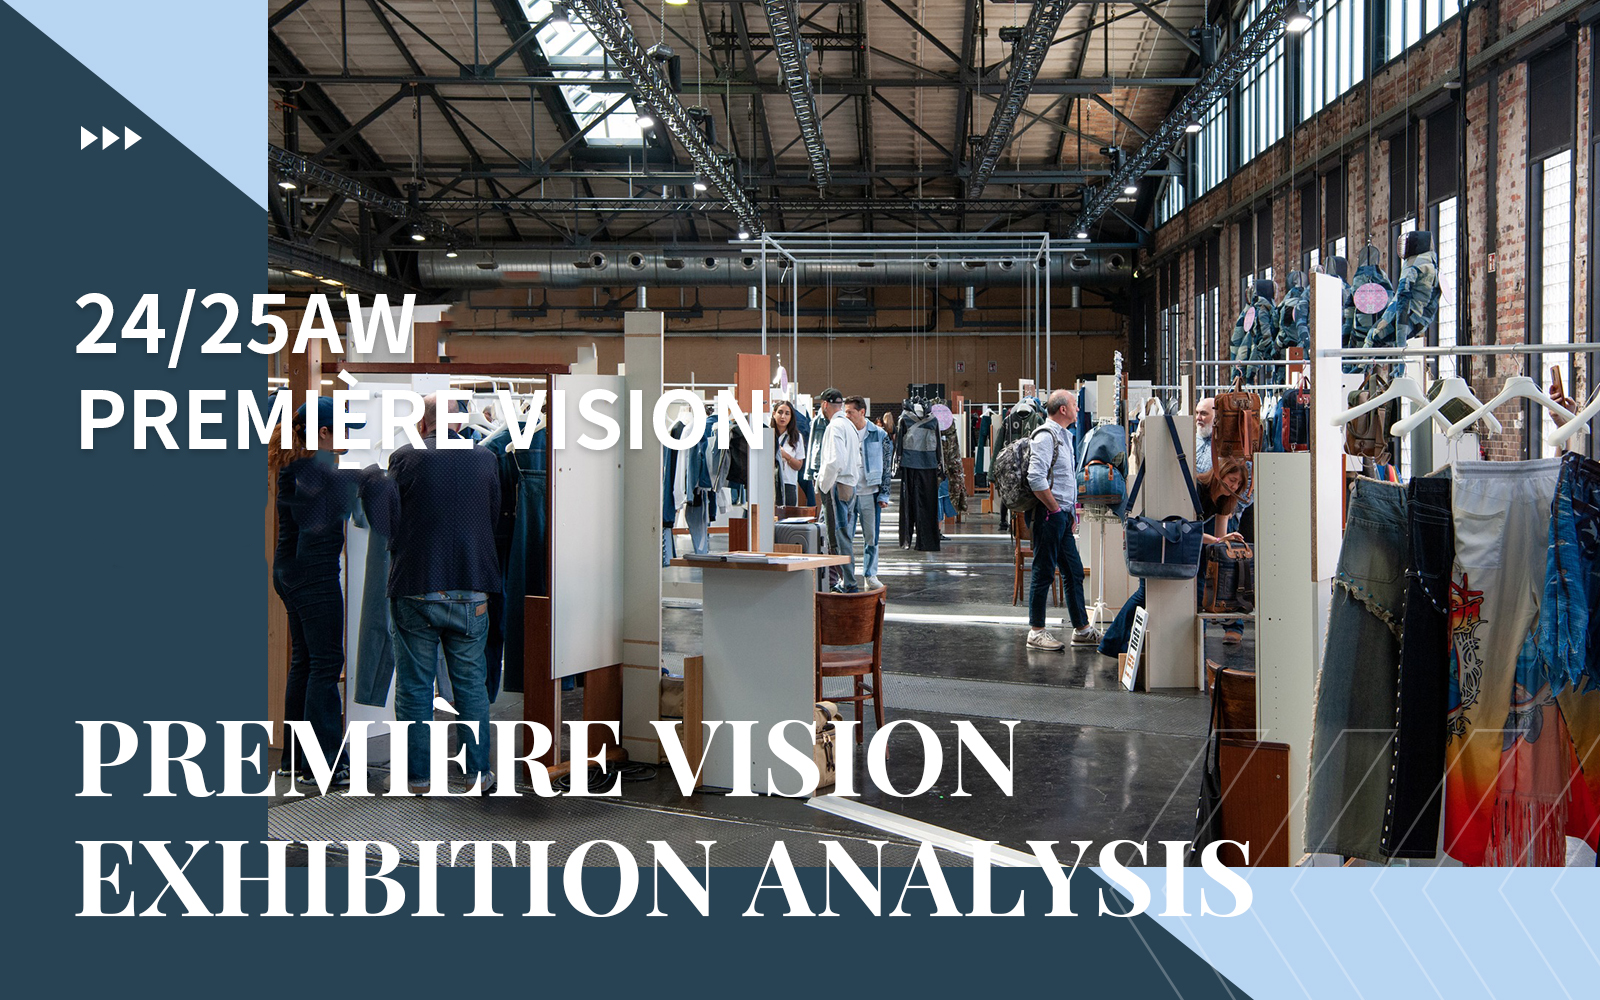 The Exhibition Analysis of Denim Première Vision